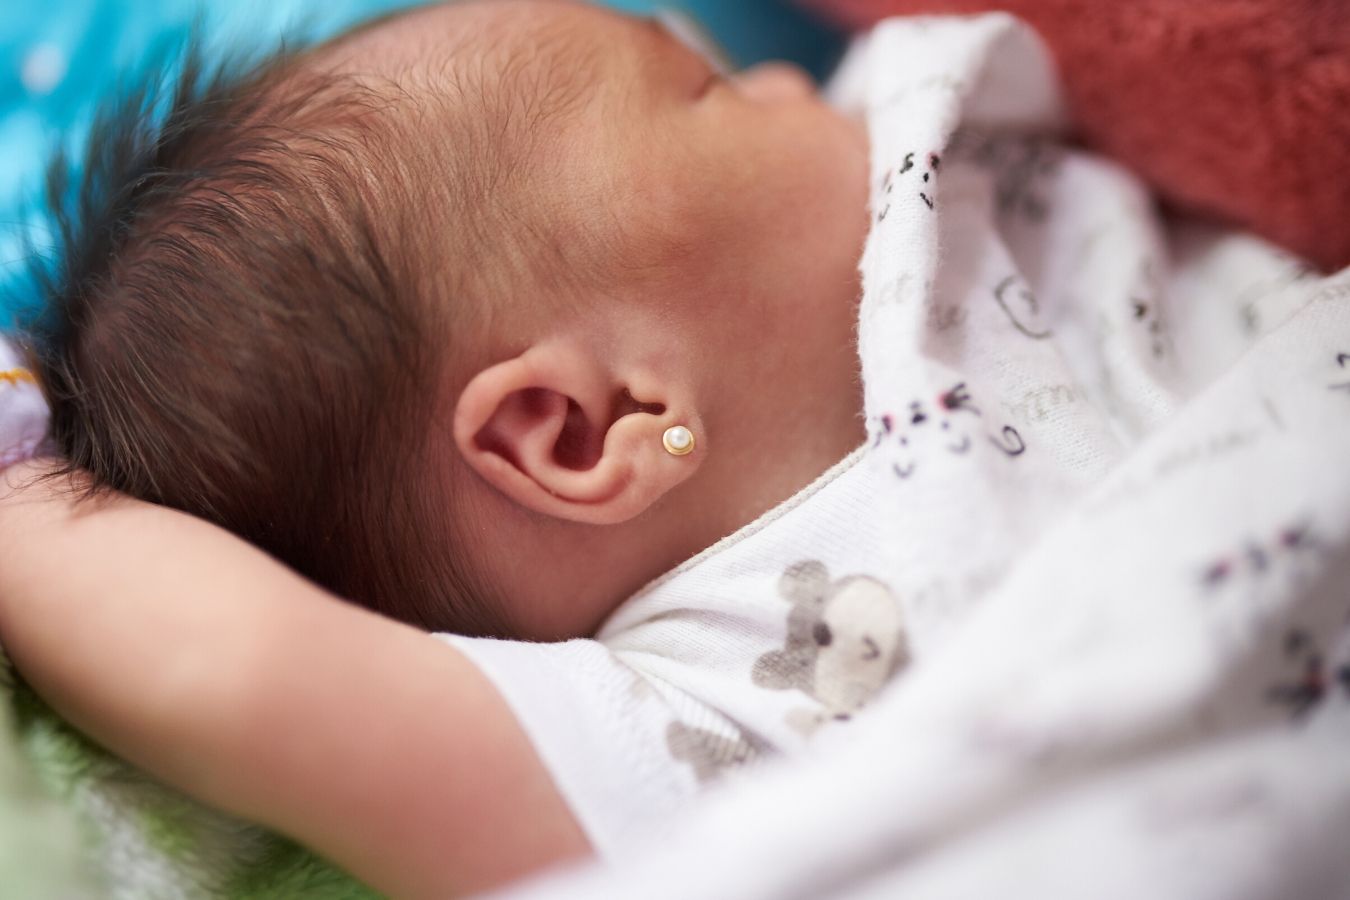 All About Piercing a Baby's Ears - BabySparks